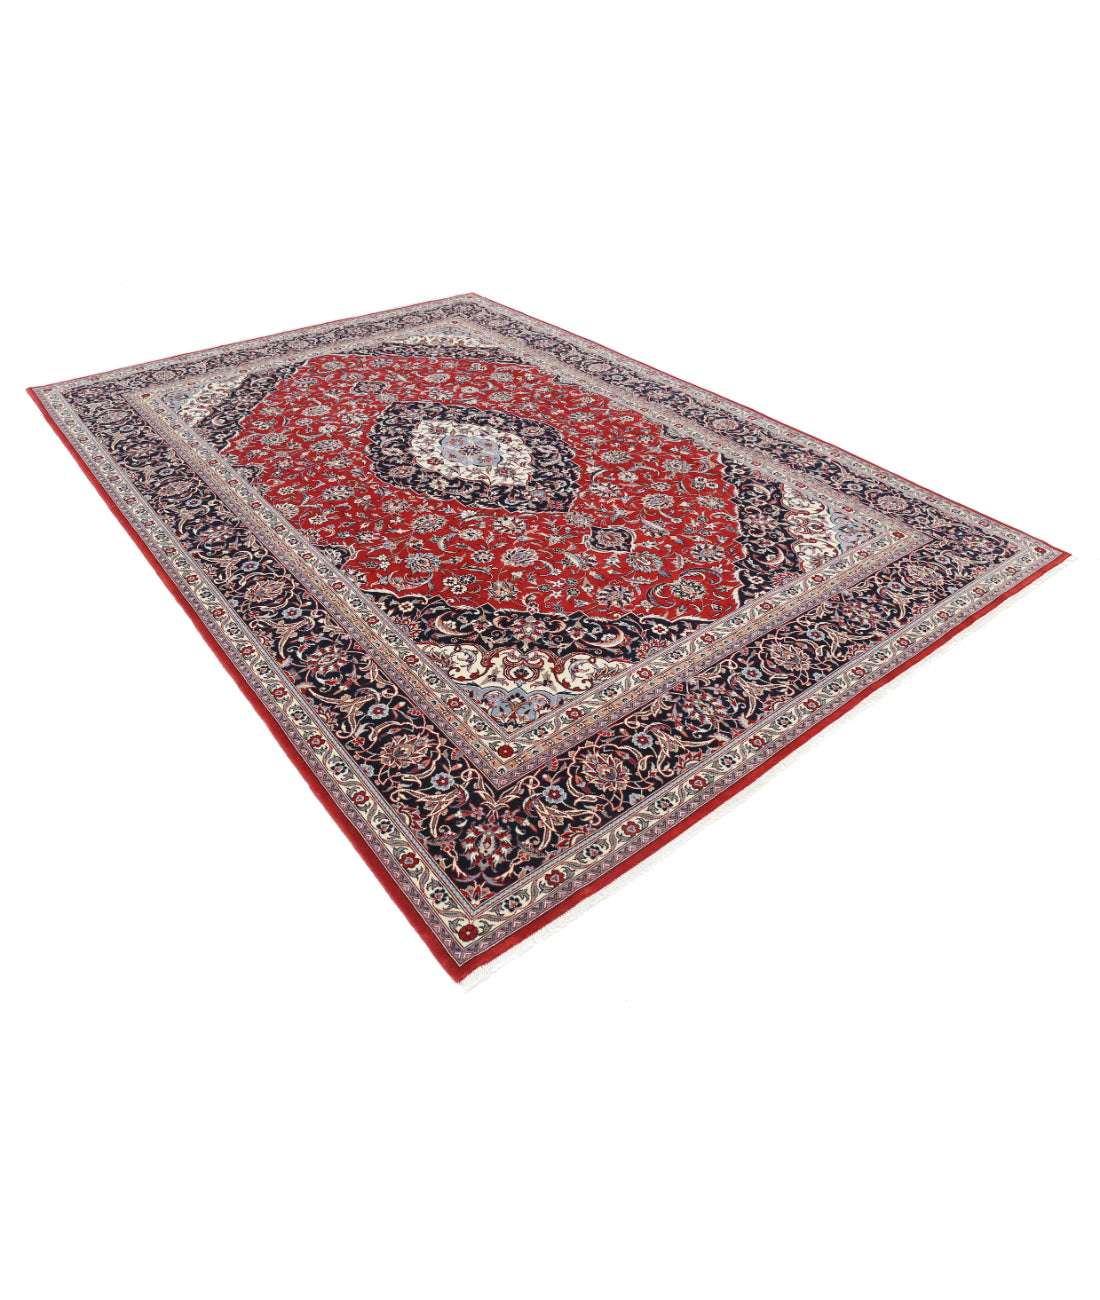 Heritage 7' 10" X 11' 3" Hand-Knotted Wool Rug 7' 10" X 11' 3" (239 X 343) / Red / Blue